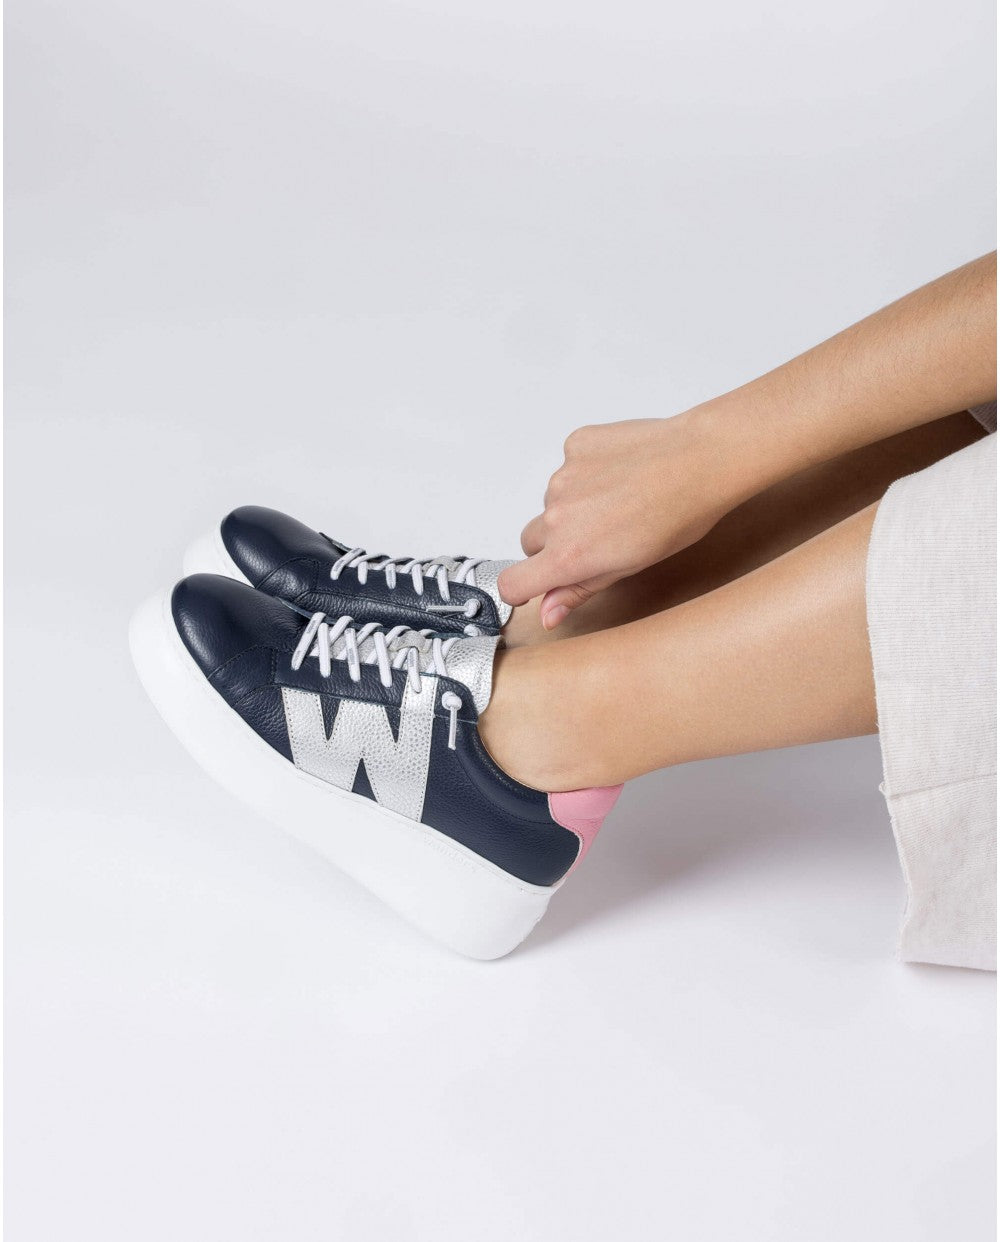 Wonders - A2650 Navy and Pink Slip On Trainer